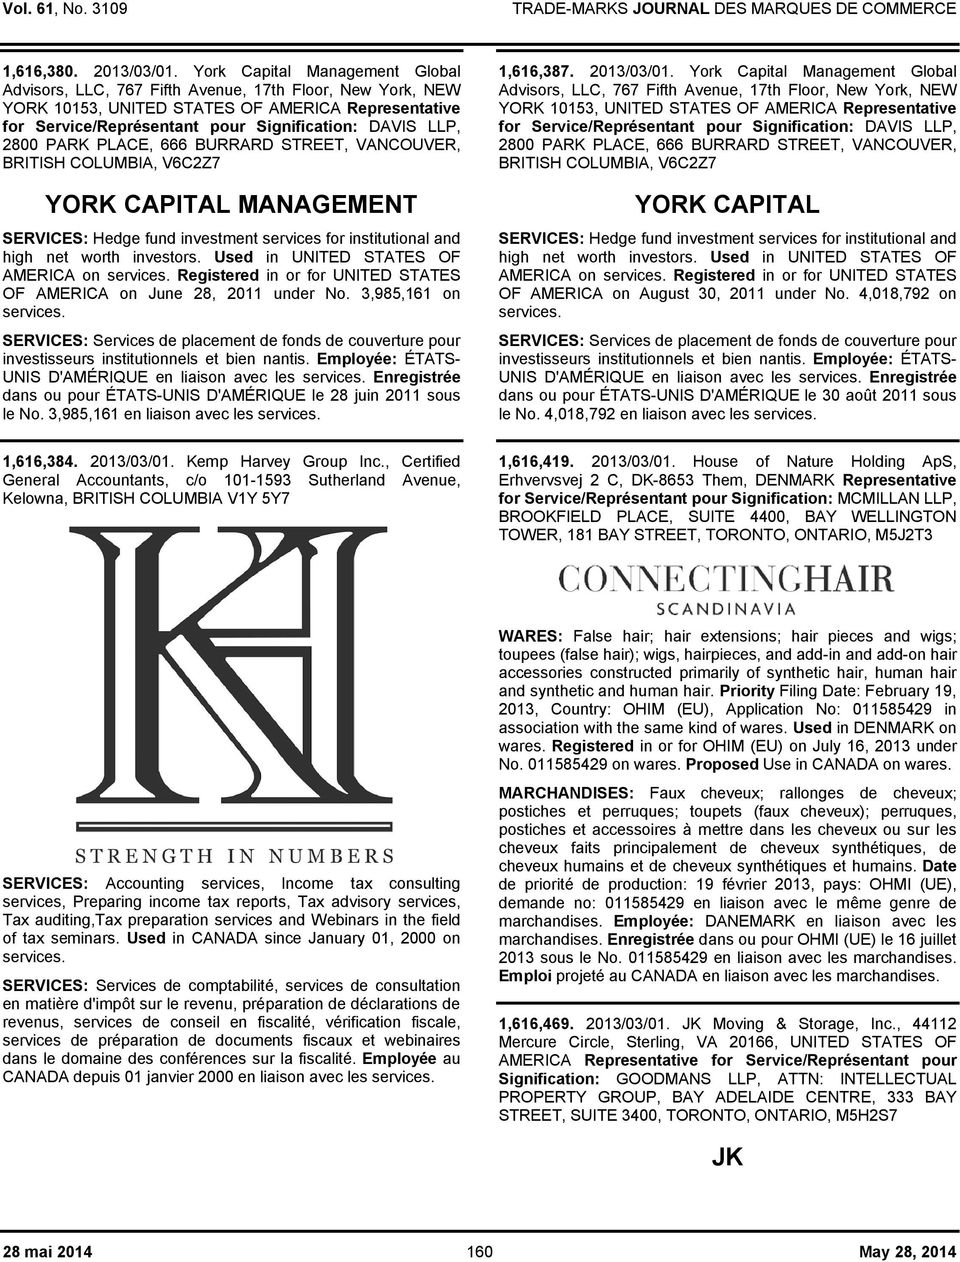 2800 PARK PLACE, 666 BURRARD STREET, VANCOUVER, BRITISH COLUMBIA, V6C2Z7 YORK CAPITAL MANAGEMENT SERVICES: Hedge fund investment services for institutional and high net worth investors.